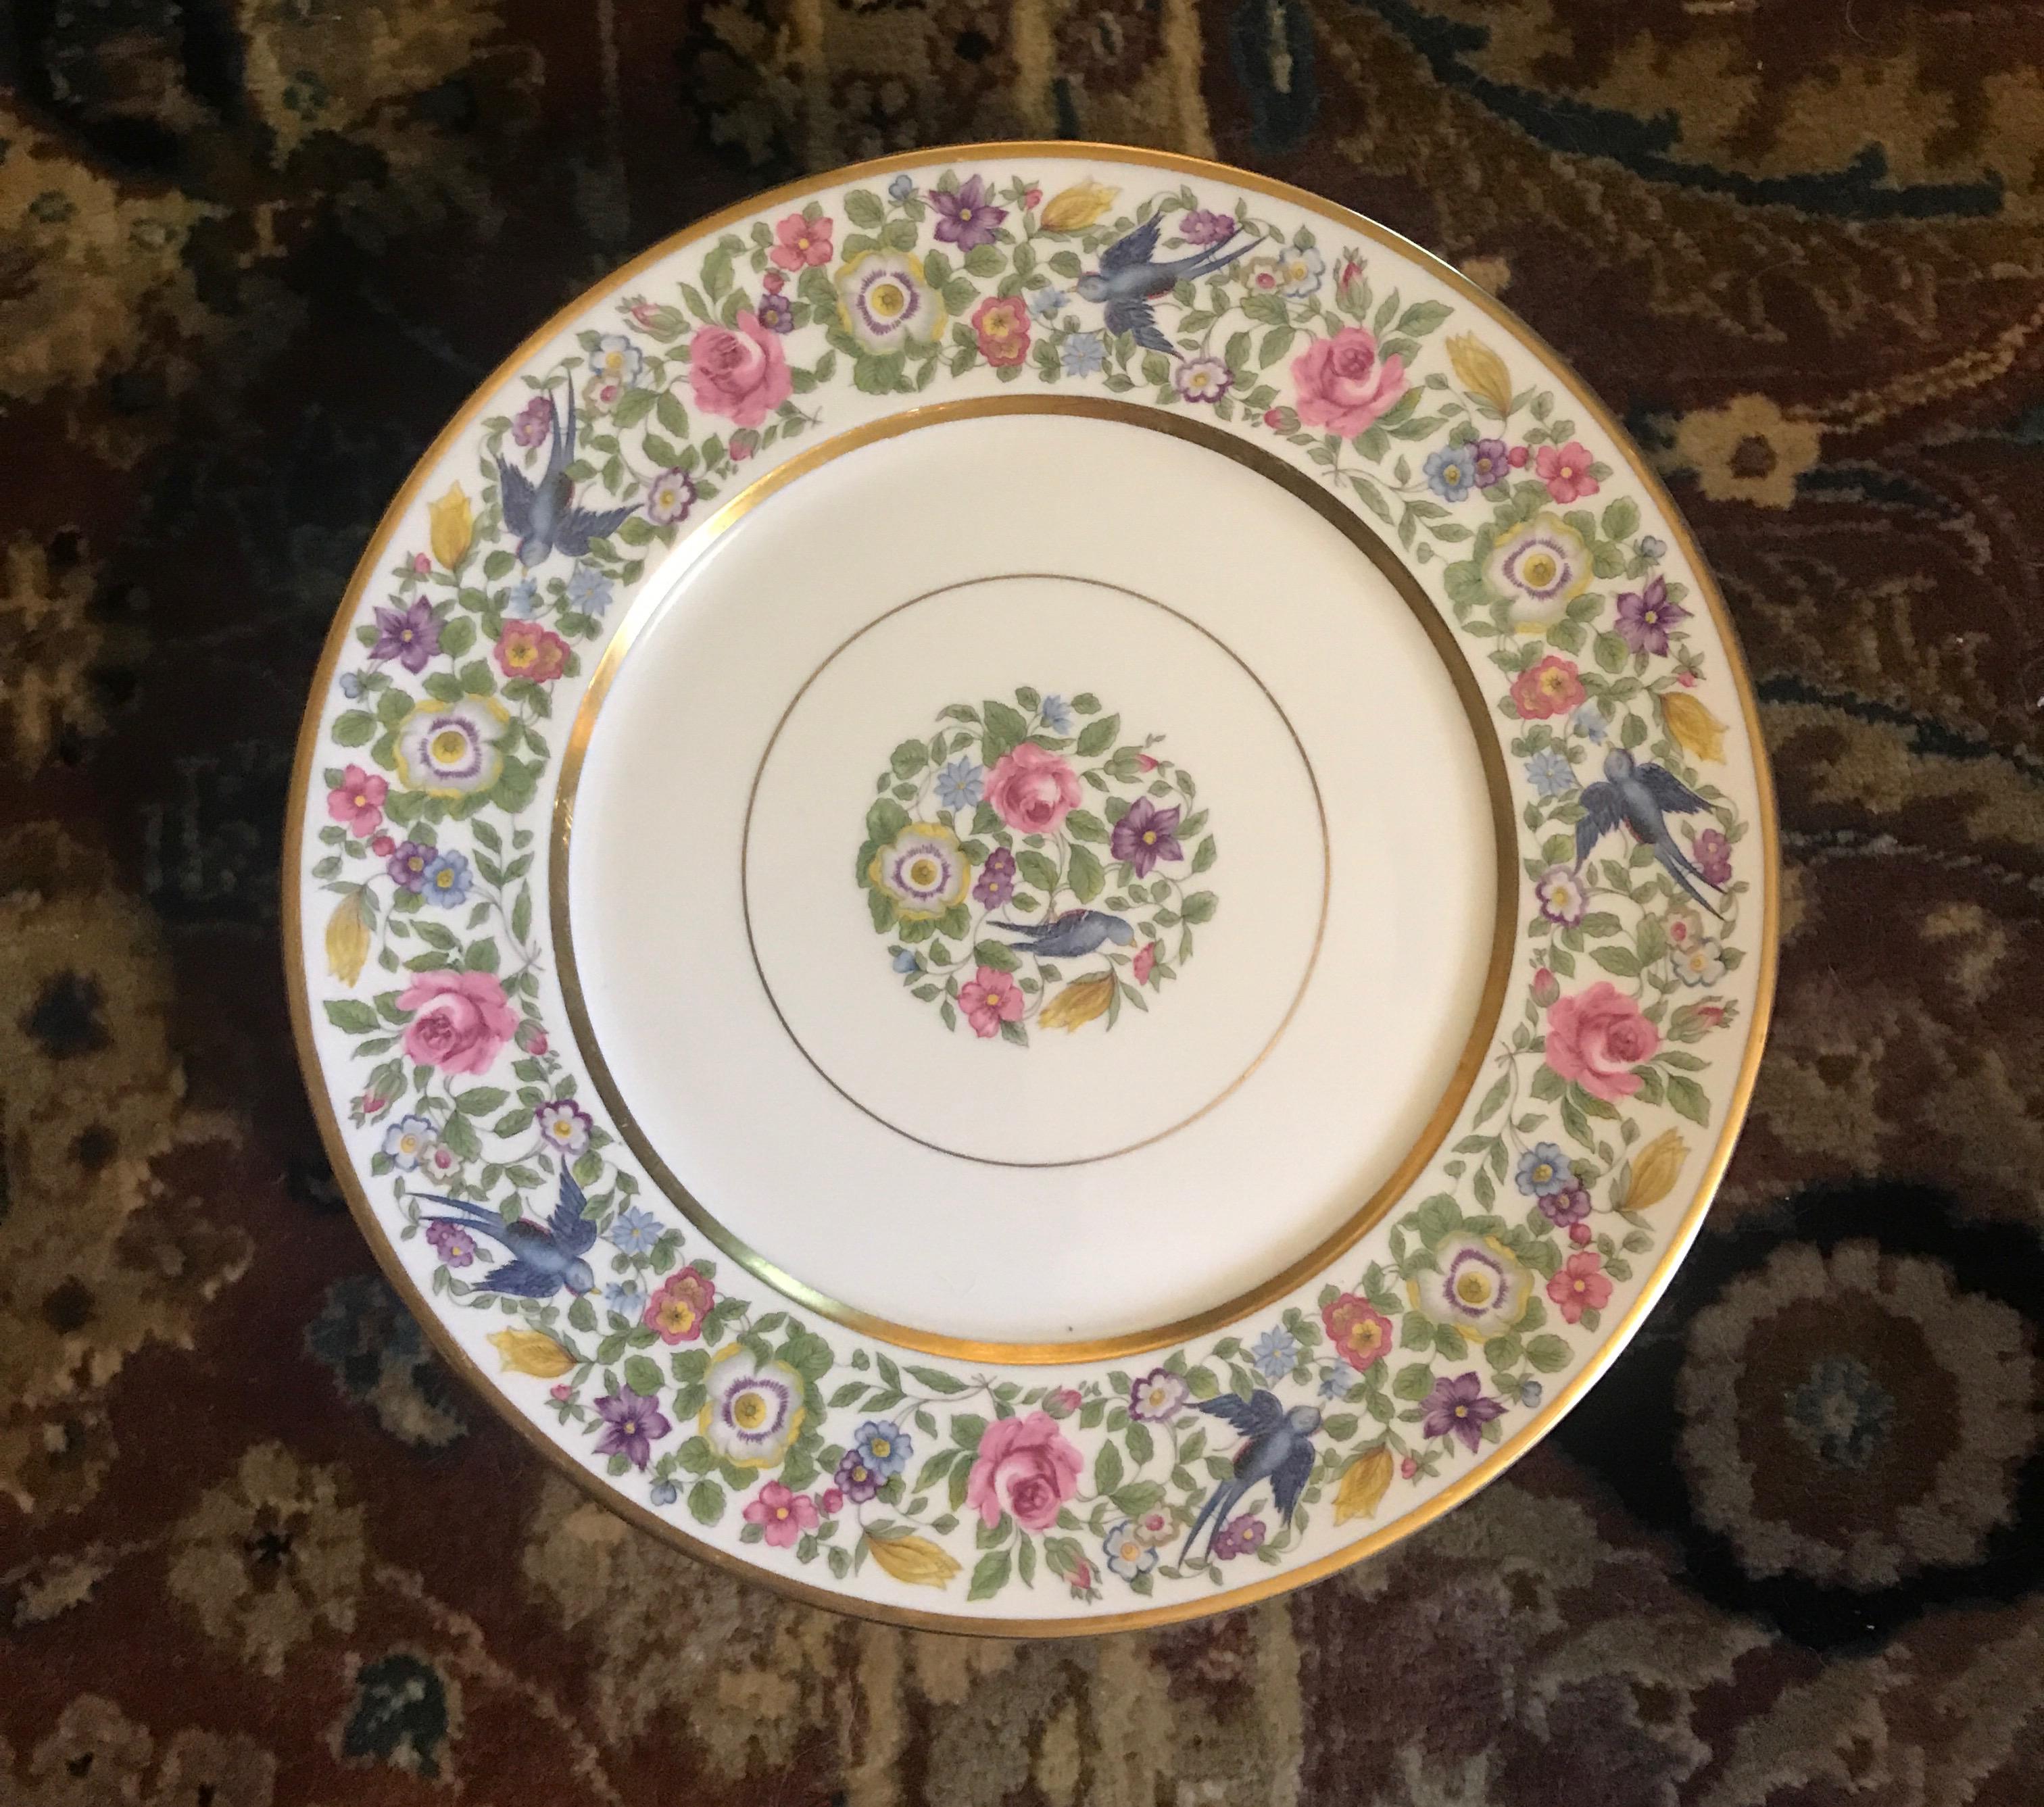 A set of nine floral service plates 10.25 inches in diameter, with gilt banding. The broad floral ban with birds and gold bands with a central floral medallion. The backstamp is from 1939.